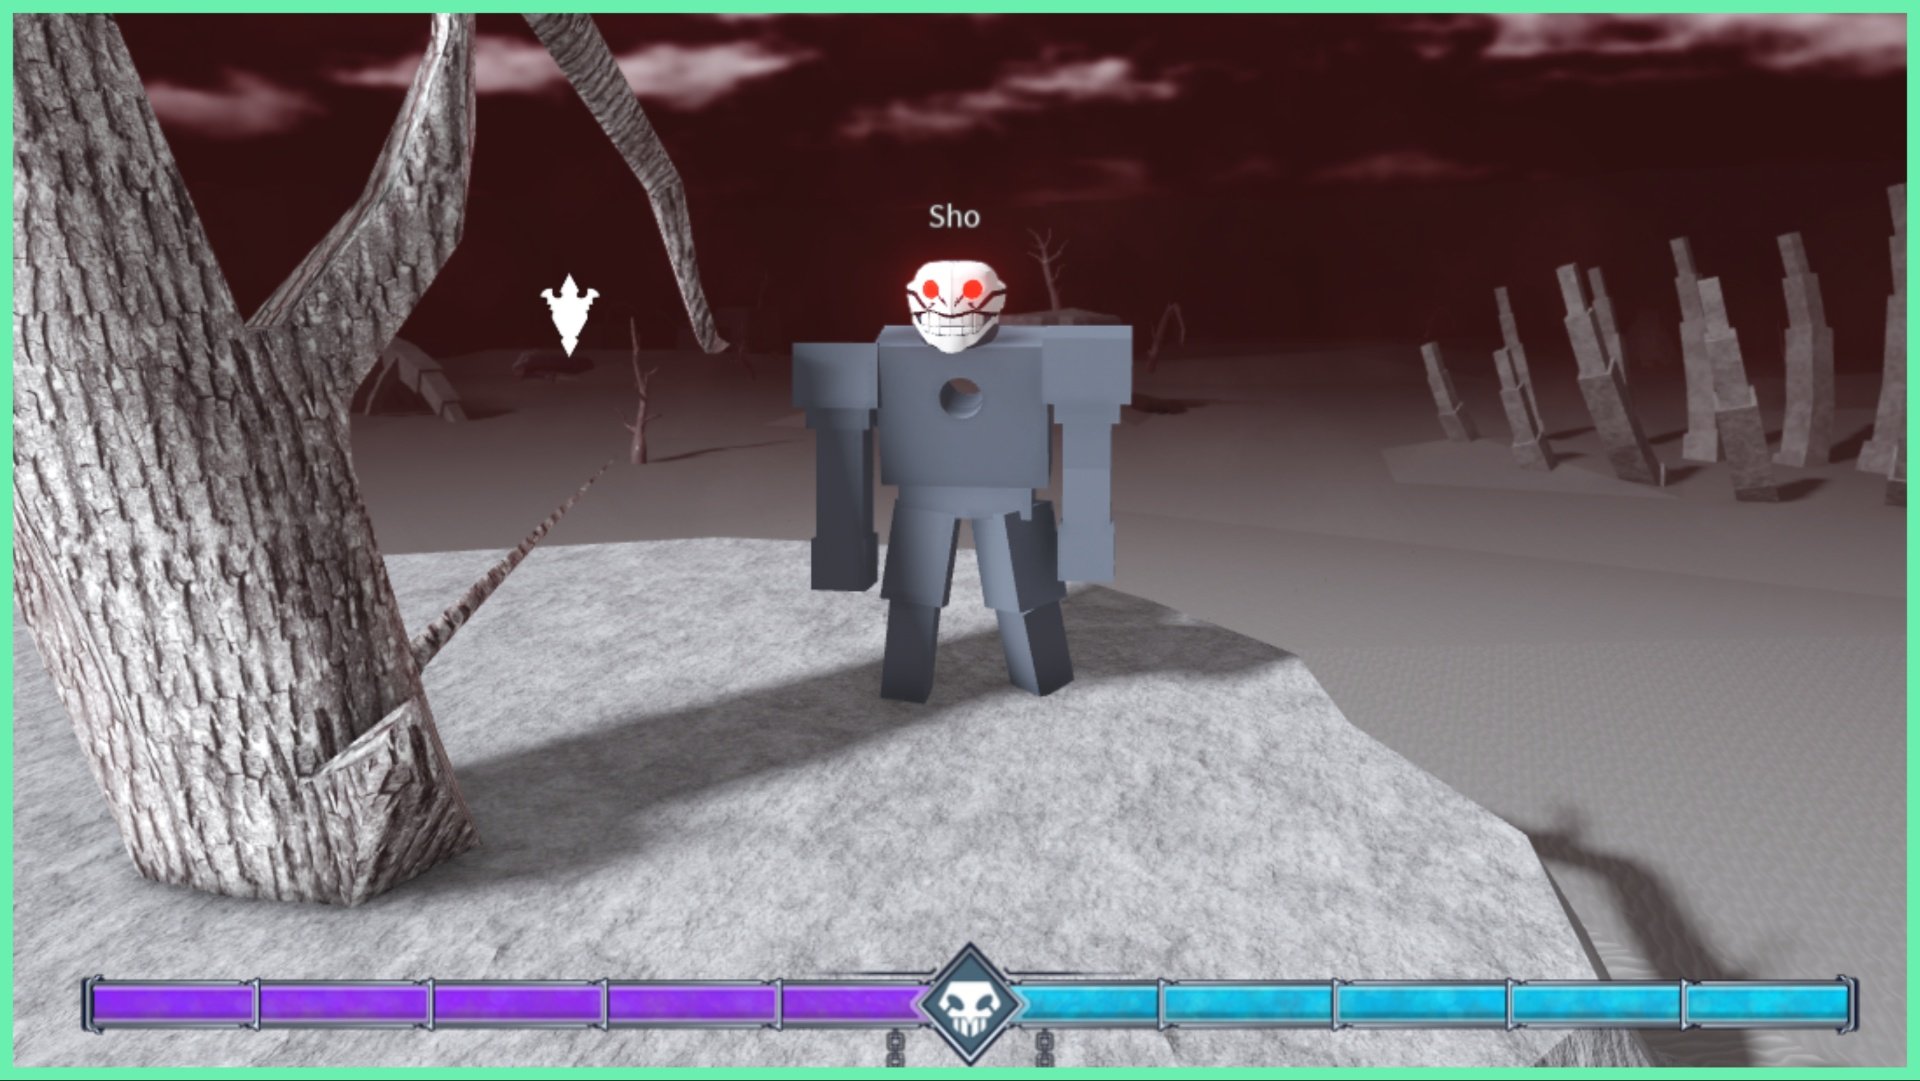 The image shows my avatar as a blue hollow with red glowing eyes. The sky behind is tinted red with a strange white outline emblem in the far distance to signal a hostile entity. The surrounding scenery is barren in all shades of white and black